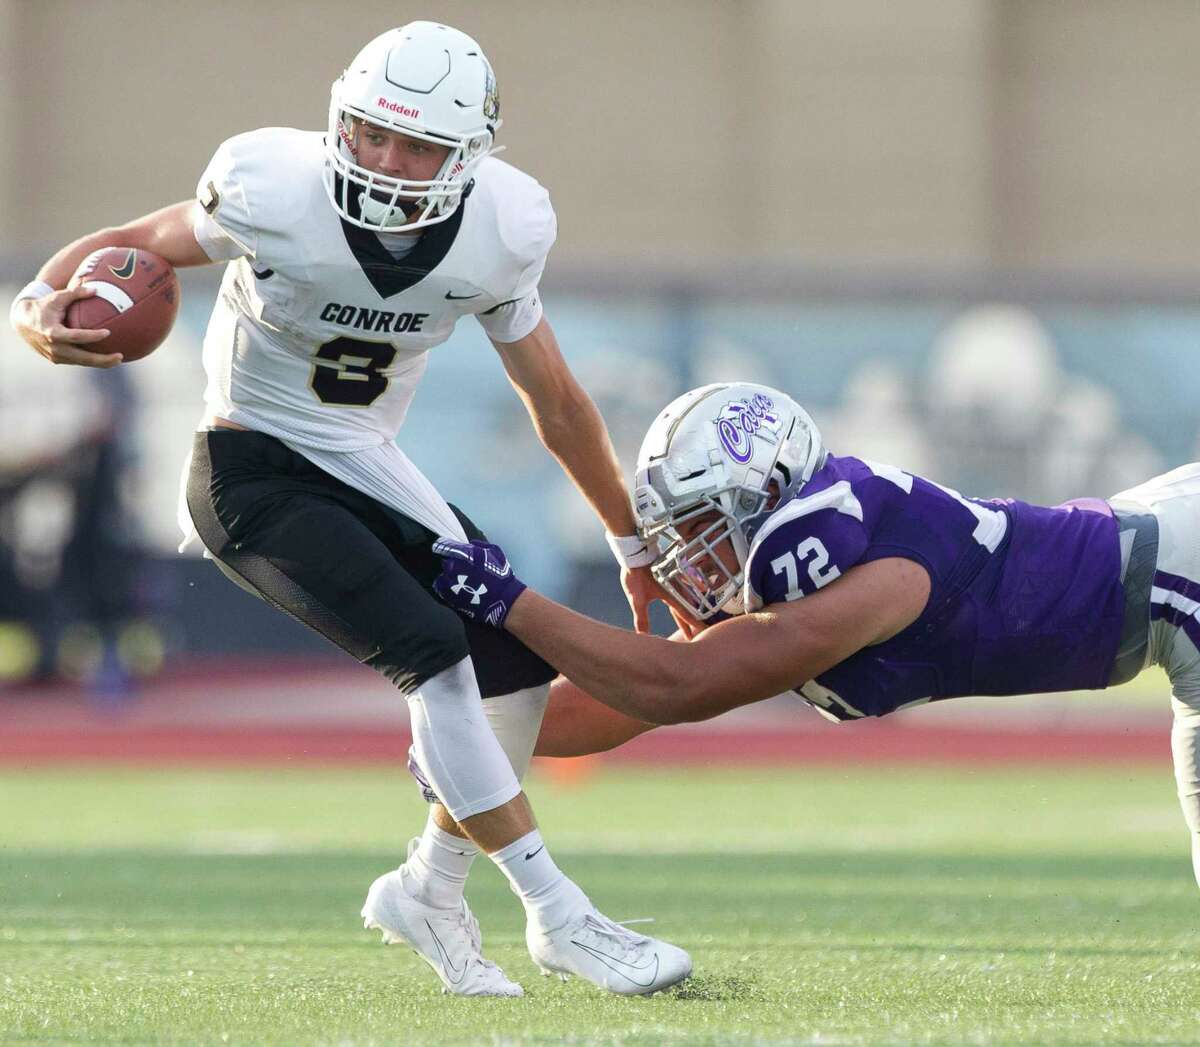 Conroe quarterback Christian Pack (3) is tackled by Klein Cain defensive linemen Brayden Espinoza (72) during the first quarter of a District 15-6A high school football game at Klein Memorial Stadium, Saturday, Sept. 28, 2019, in Spring.